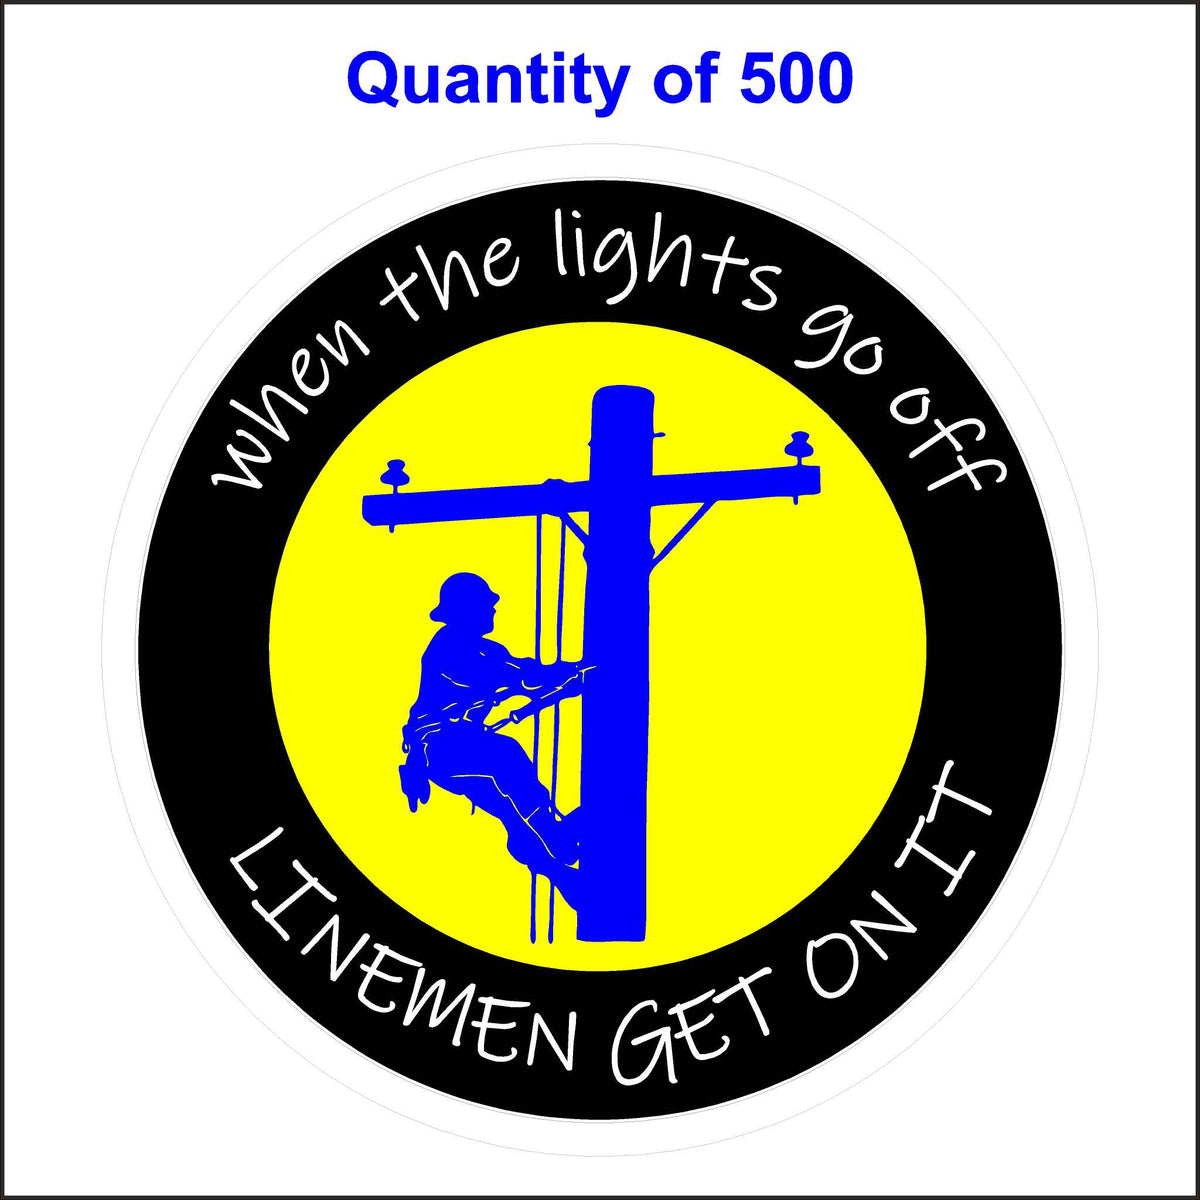 When the Lights Go Off Lineman Get it on Sticker. 500 Quantity.